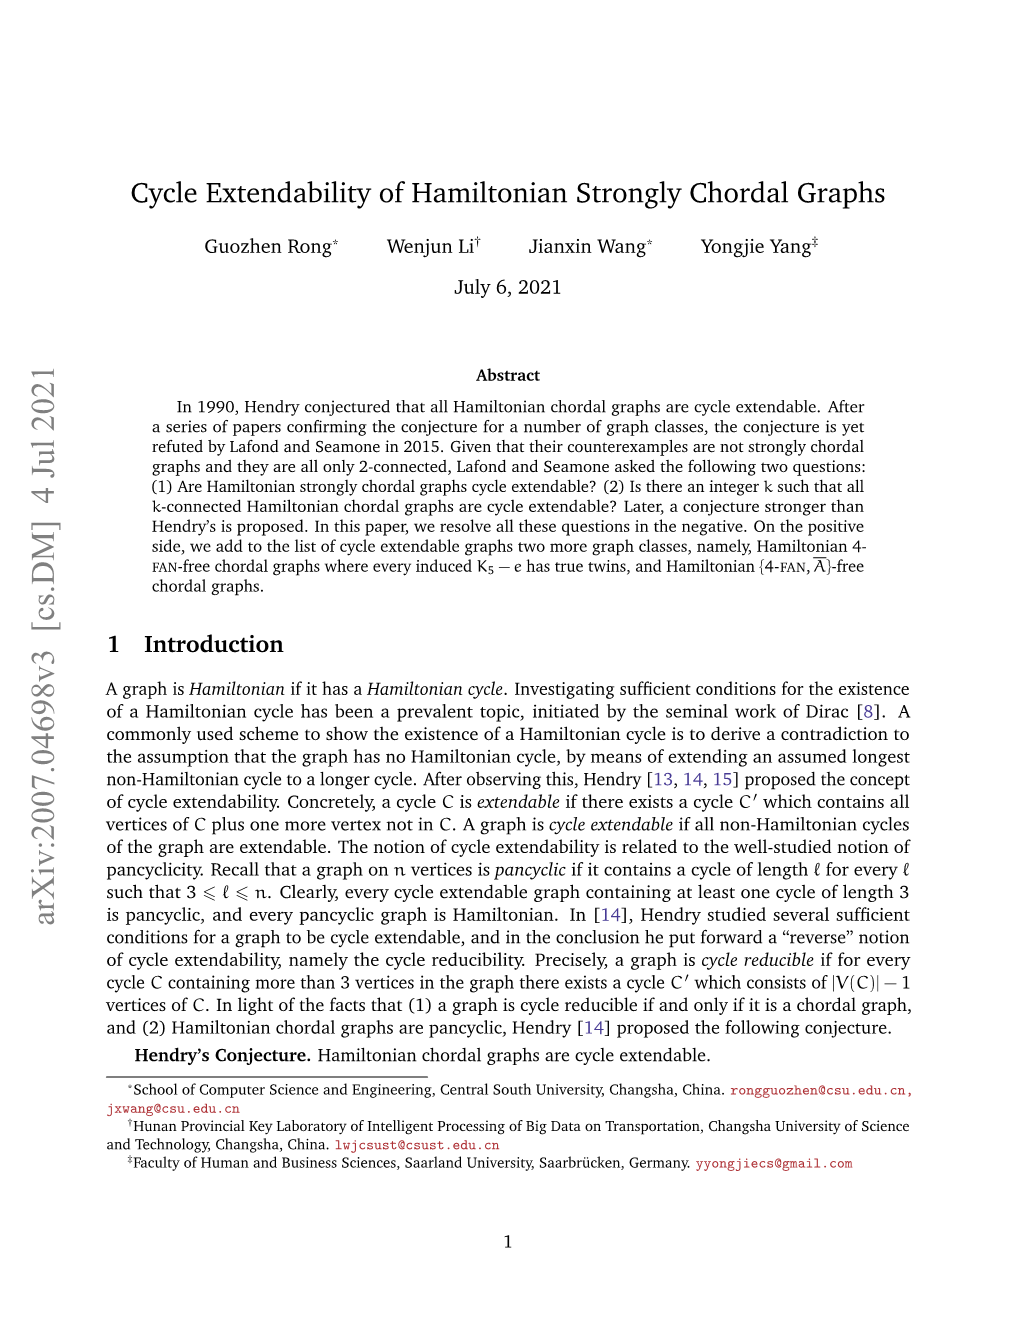 Cycle Extendability of Hamiltonian Strongly Chordal Graphs